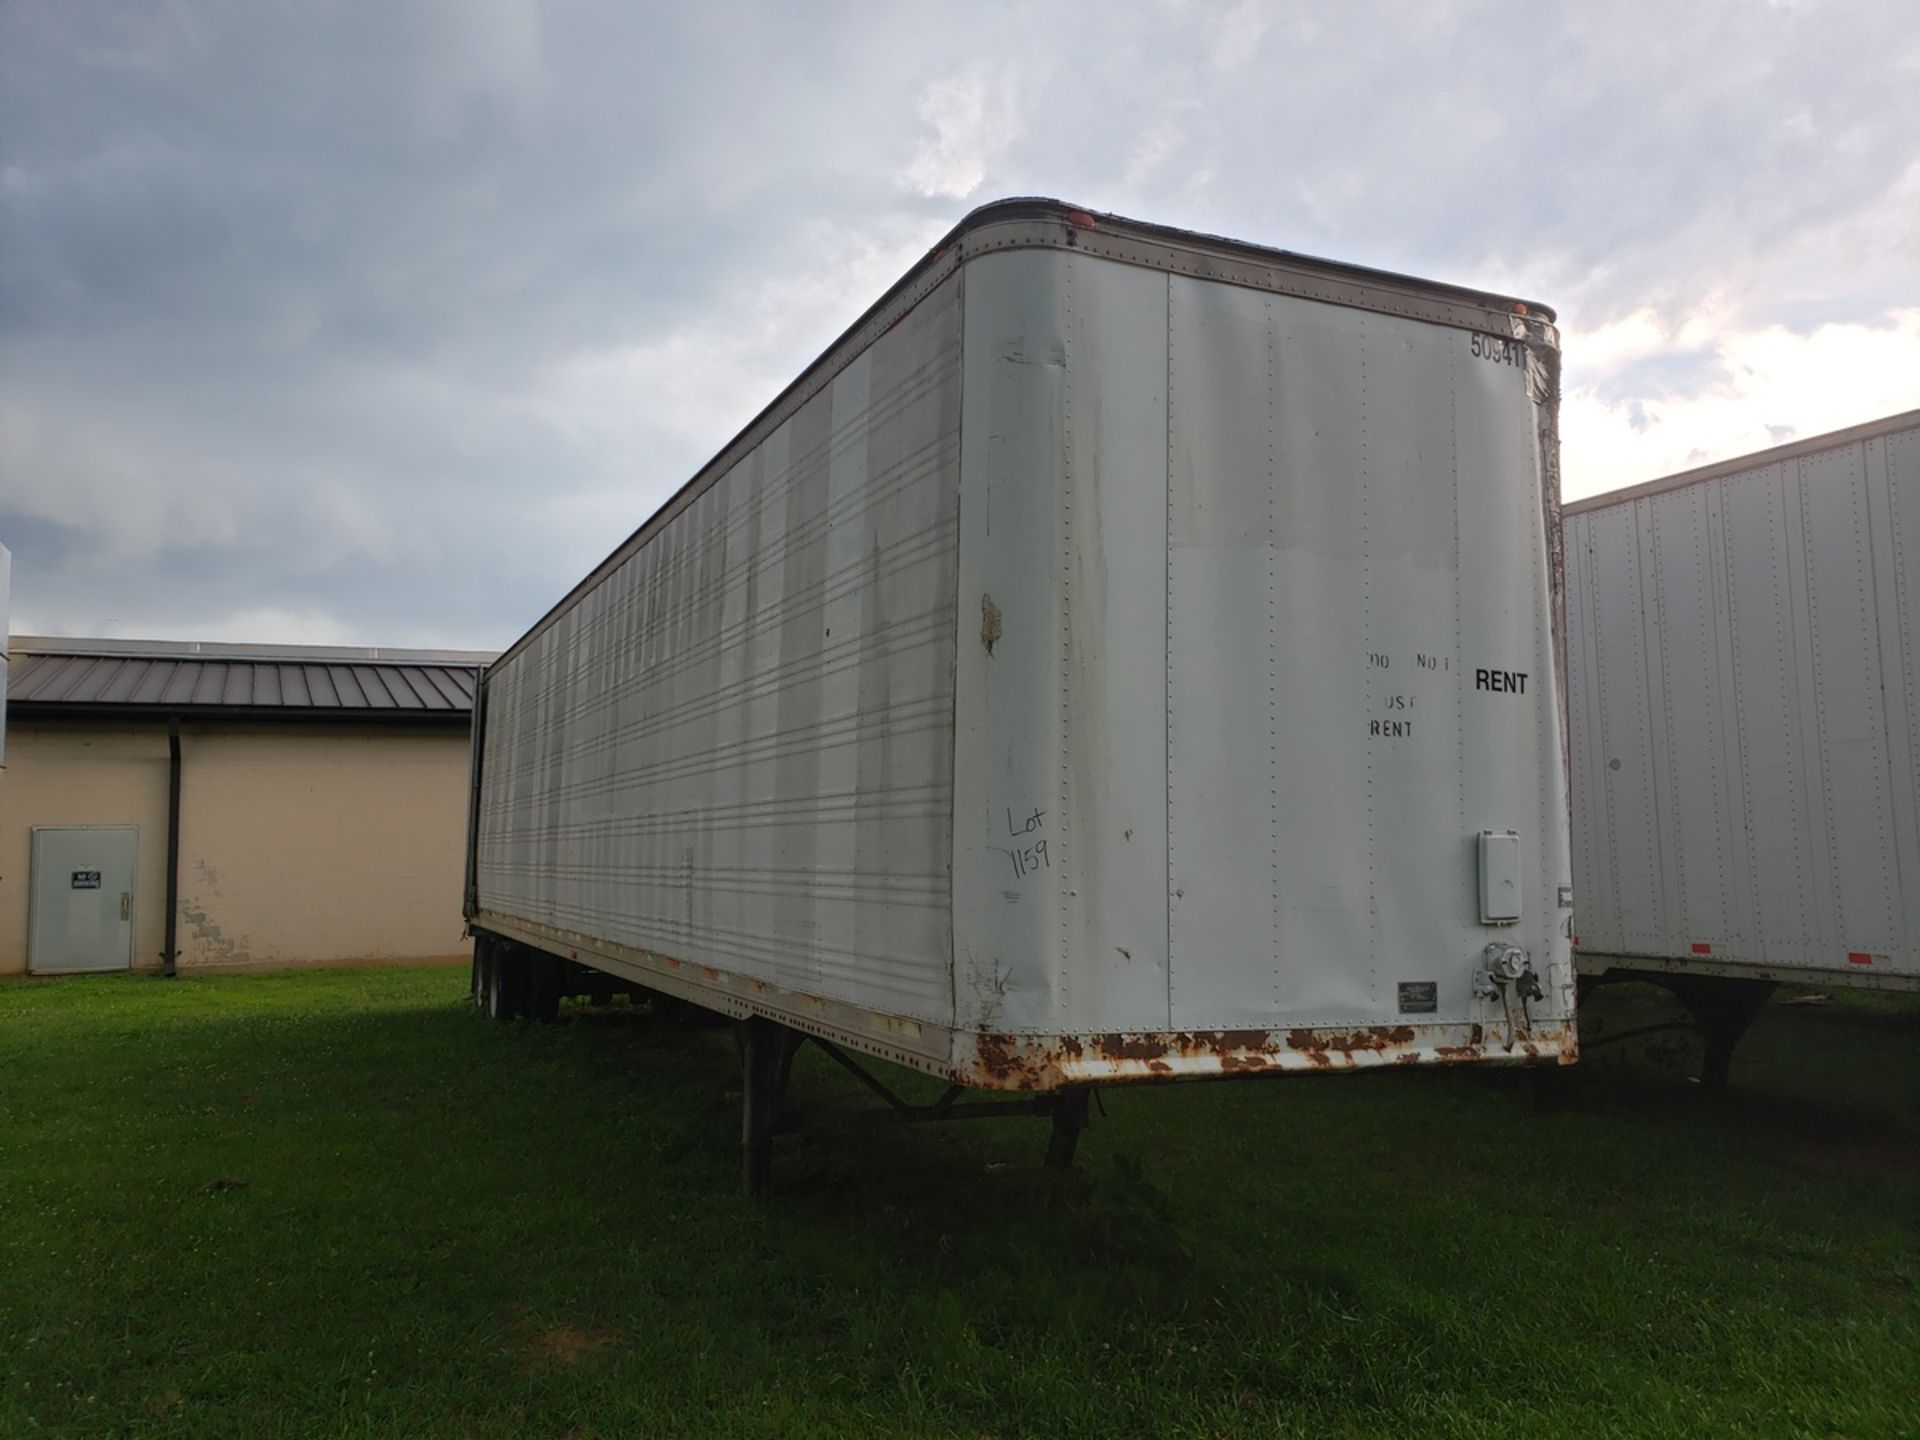 Dry Van Storage Trailer, Trailer # 50941. (No Title) Rig Fee: $Buyer To Remove